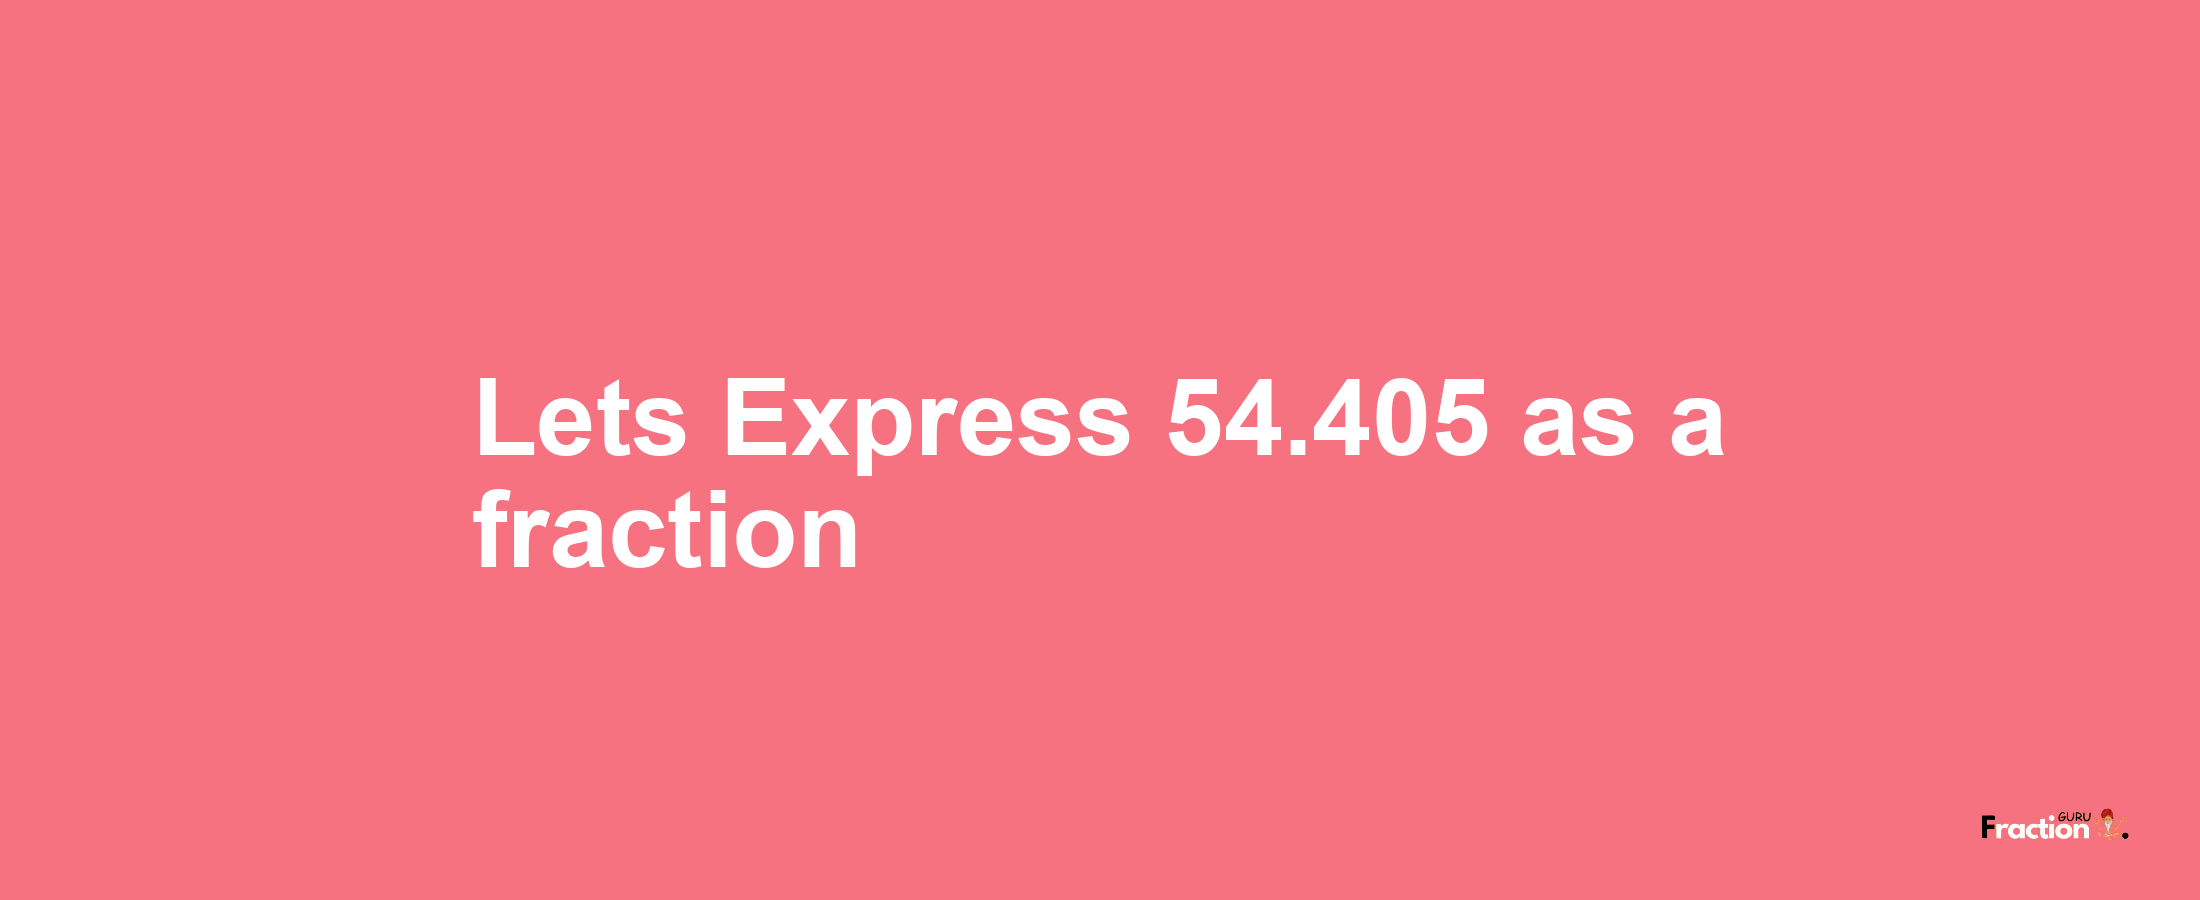 Lets Express 54.405 as afraction